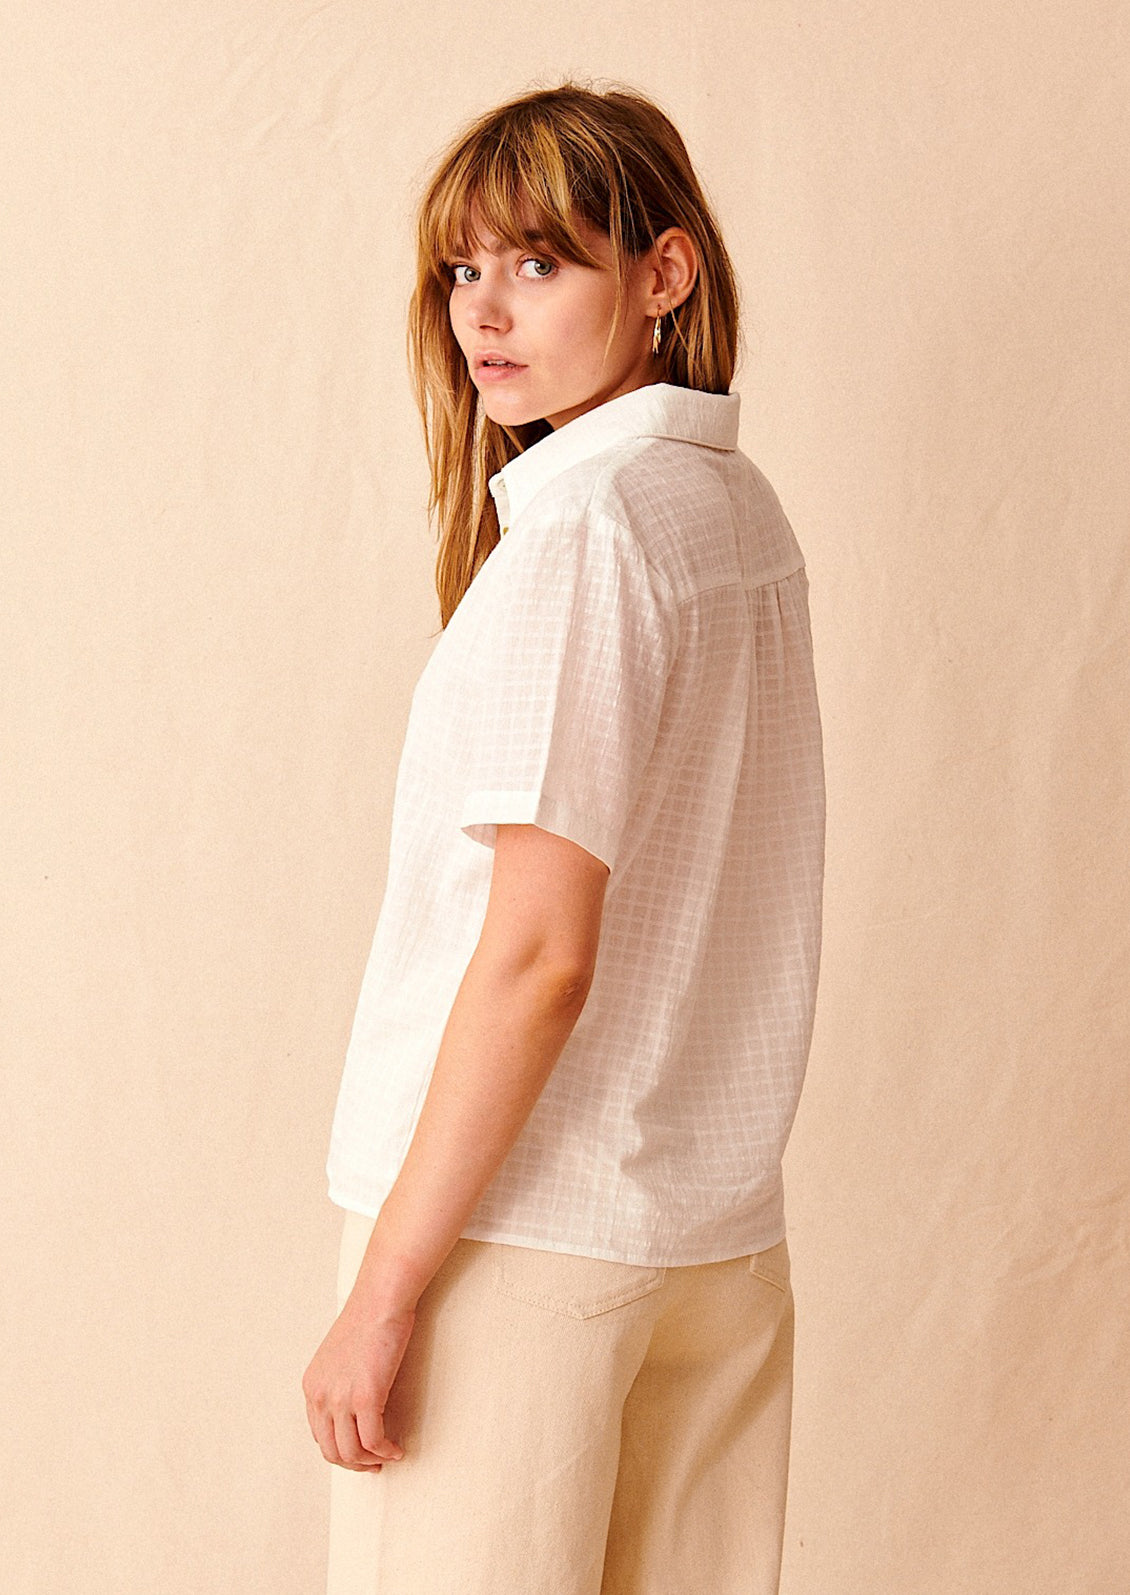 A woman wearing a short sleeve collared shirt with tonal grid texture.